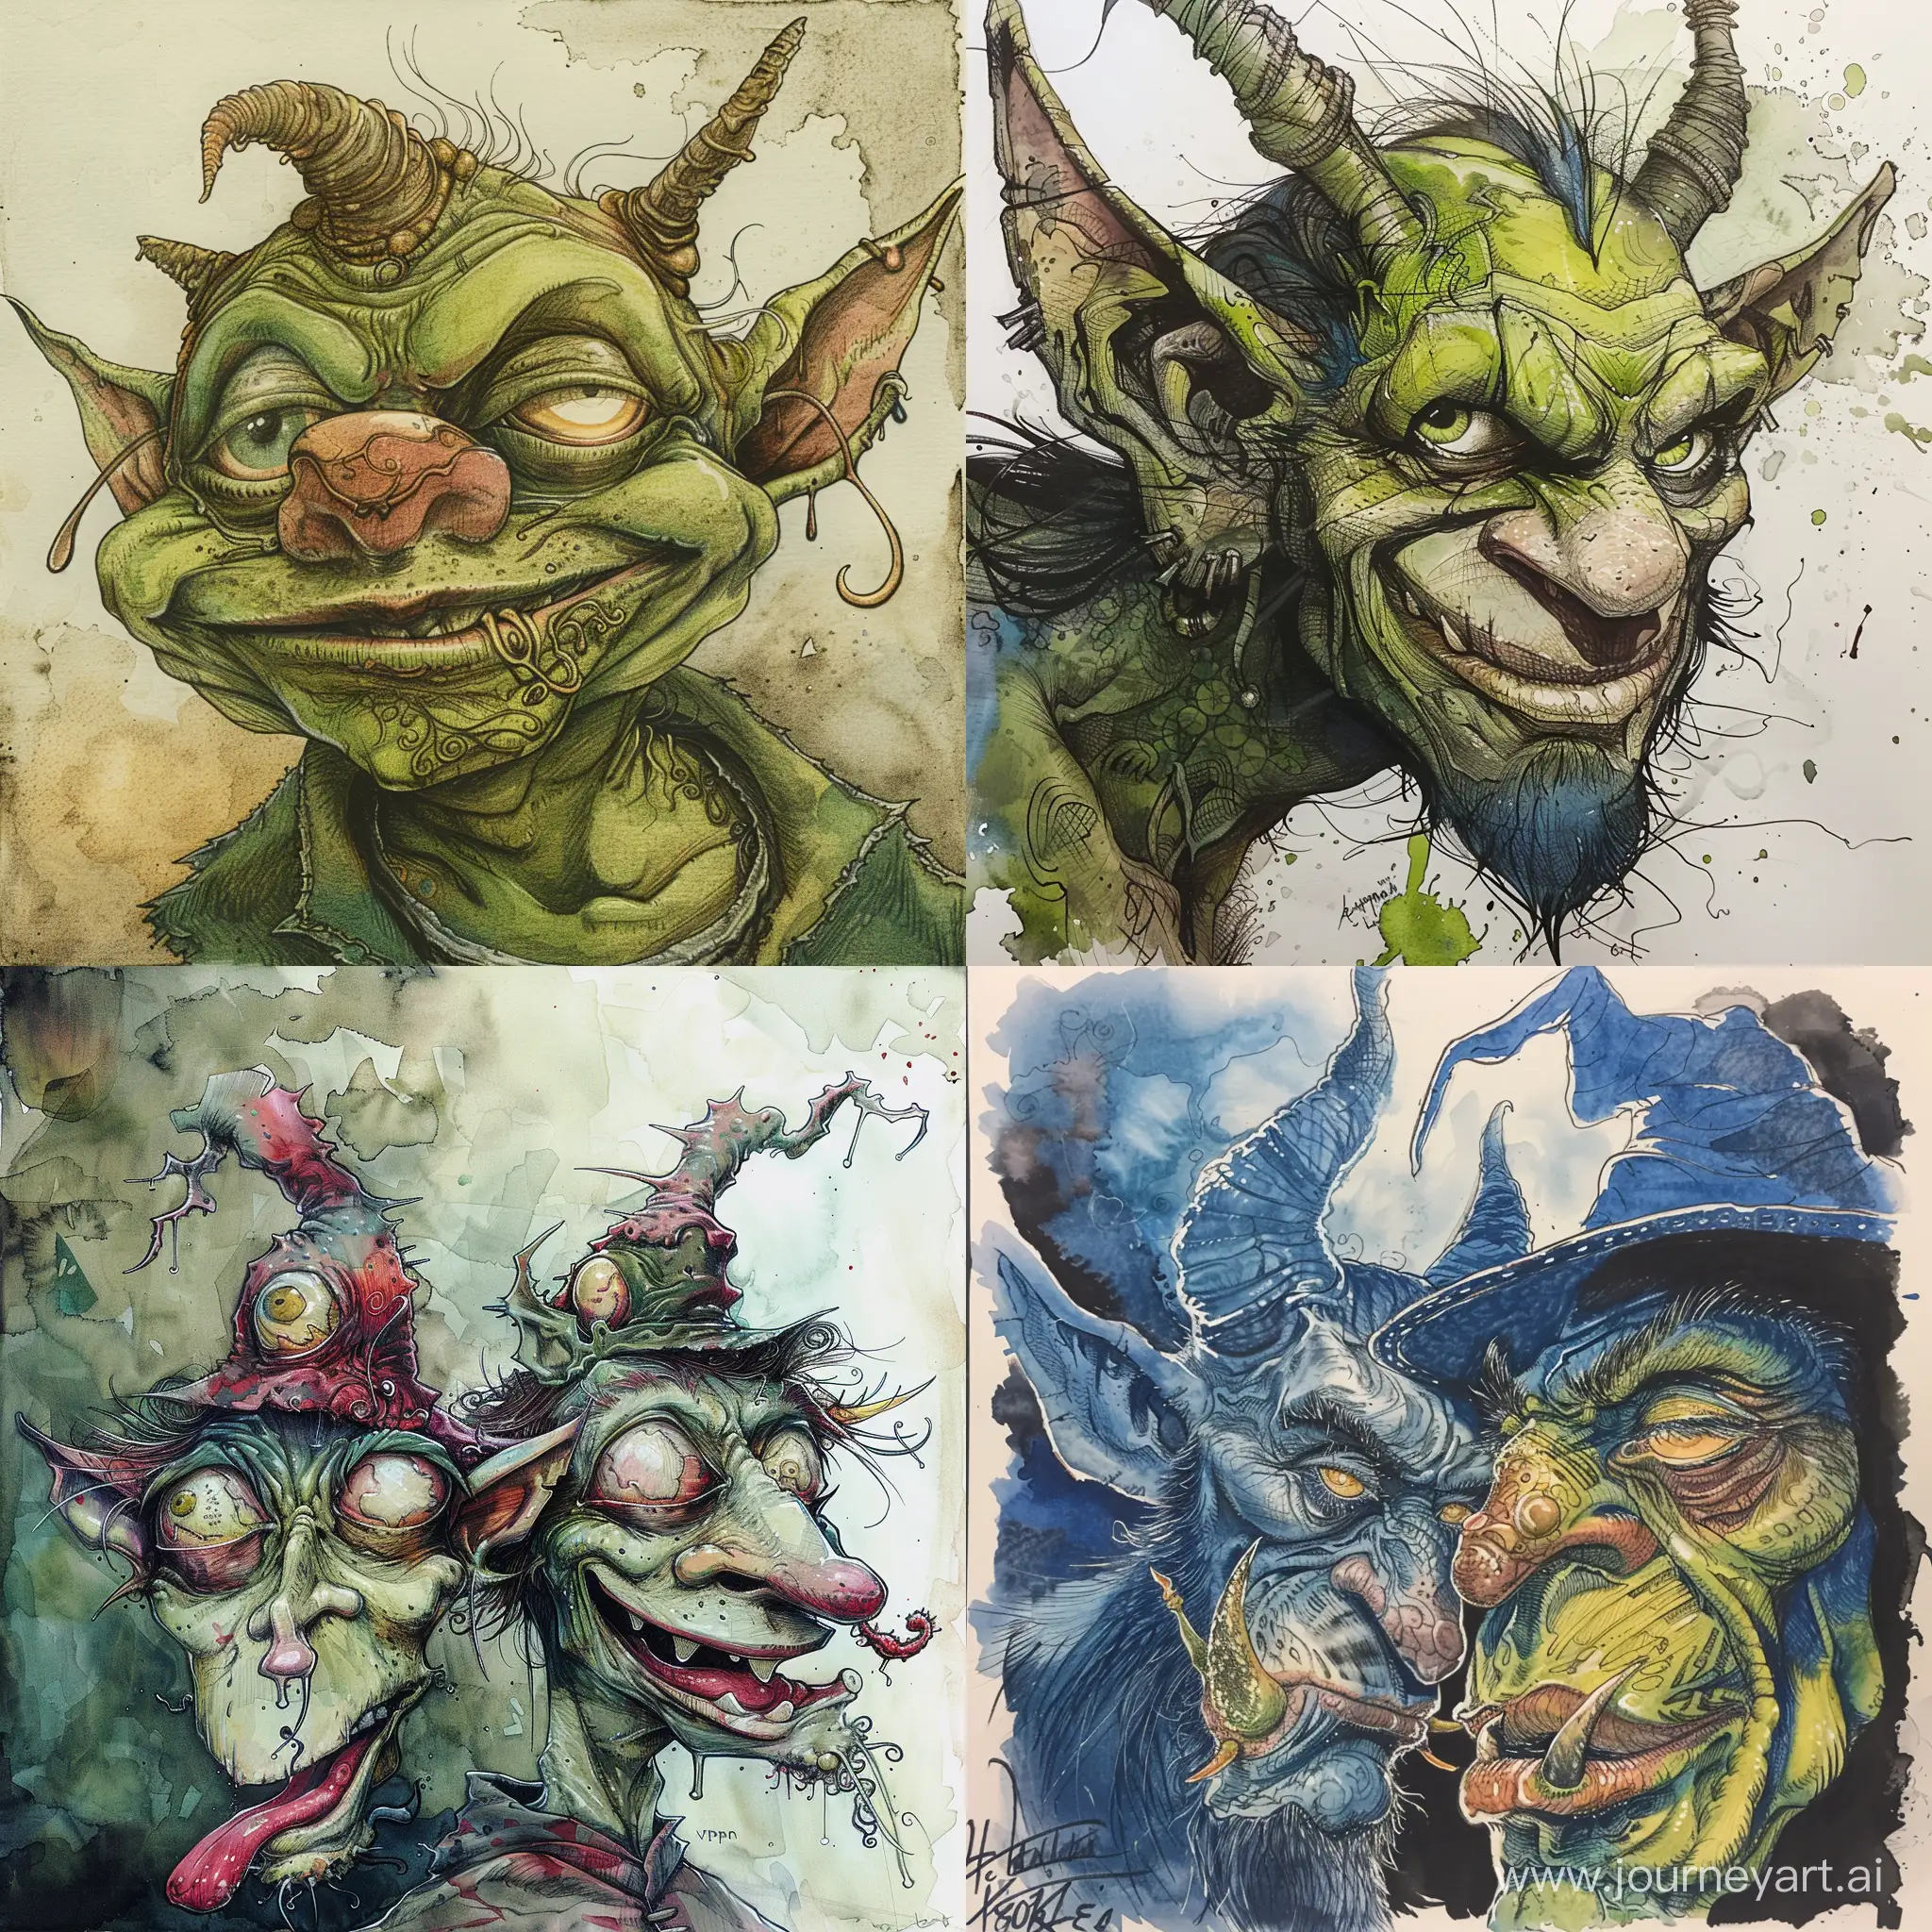 Hybrid-Nikroman-and-Goblin-Watercolor-Painting-with-Aesthetic-Filigree-and-Humorous-Caricature